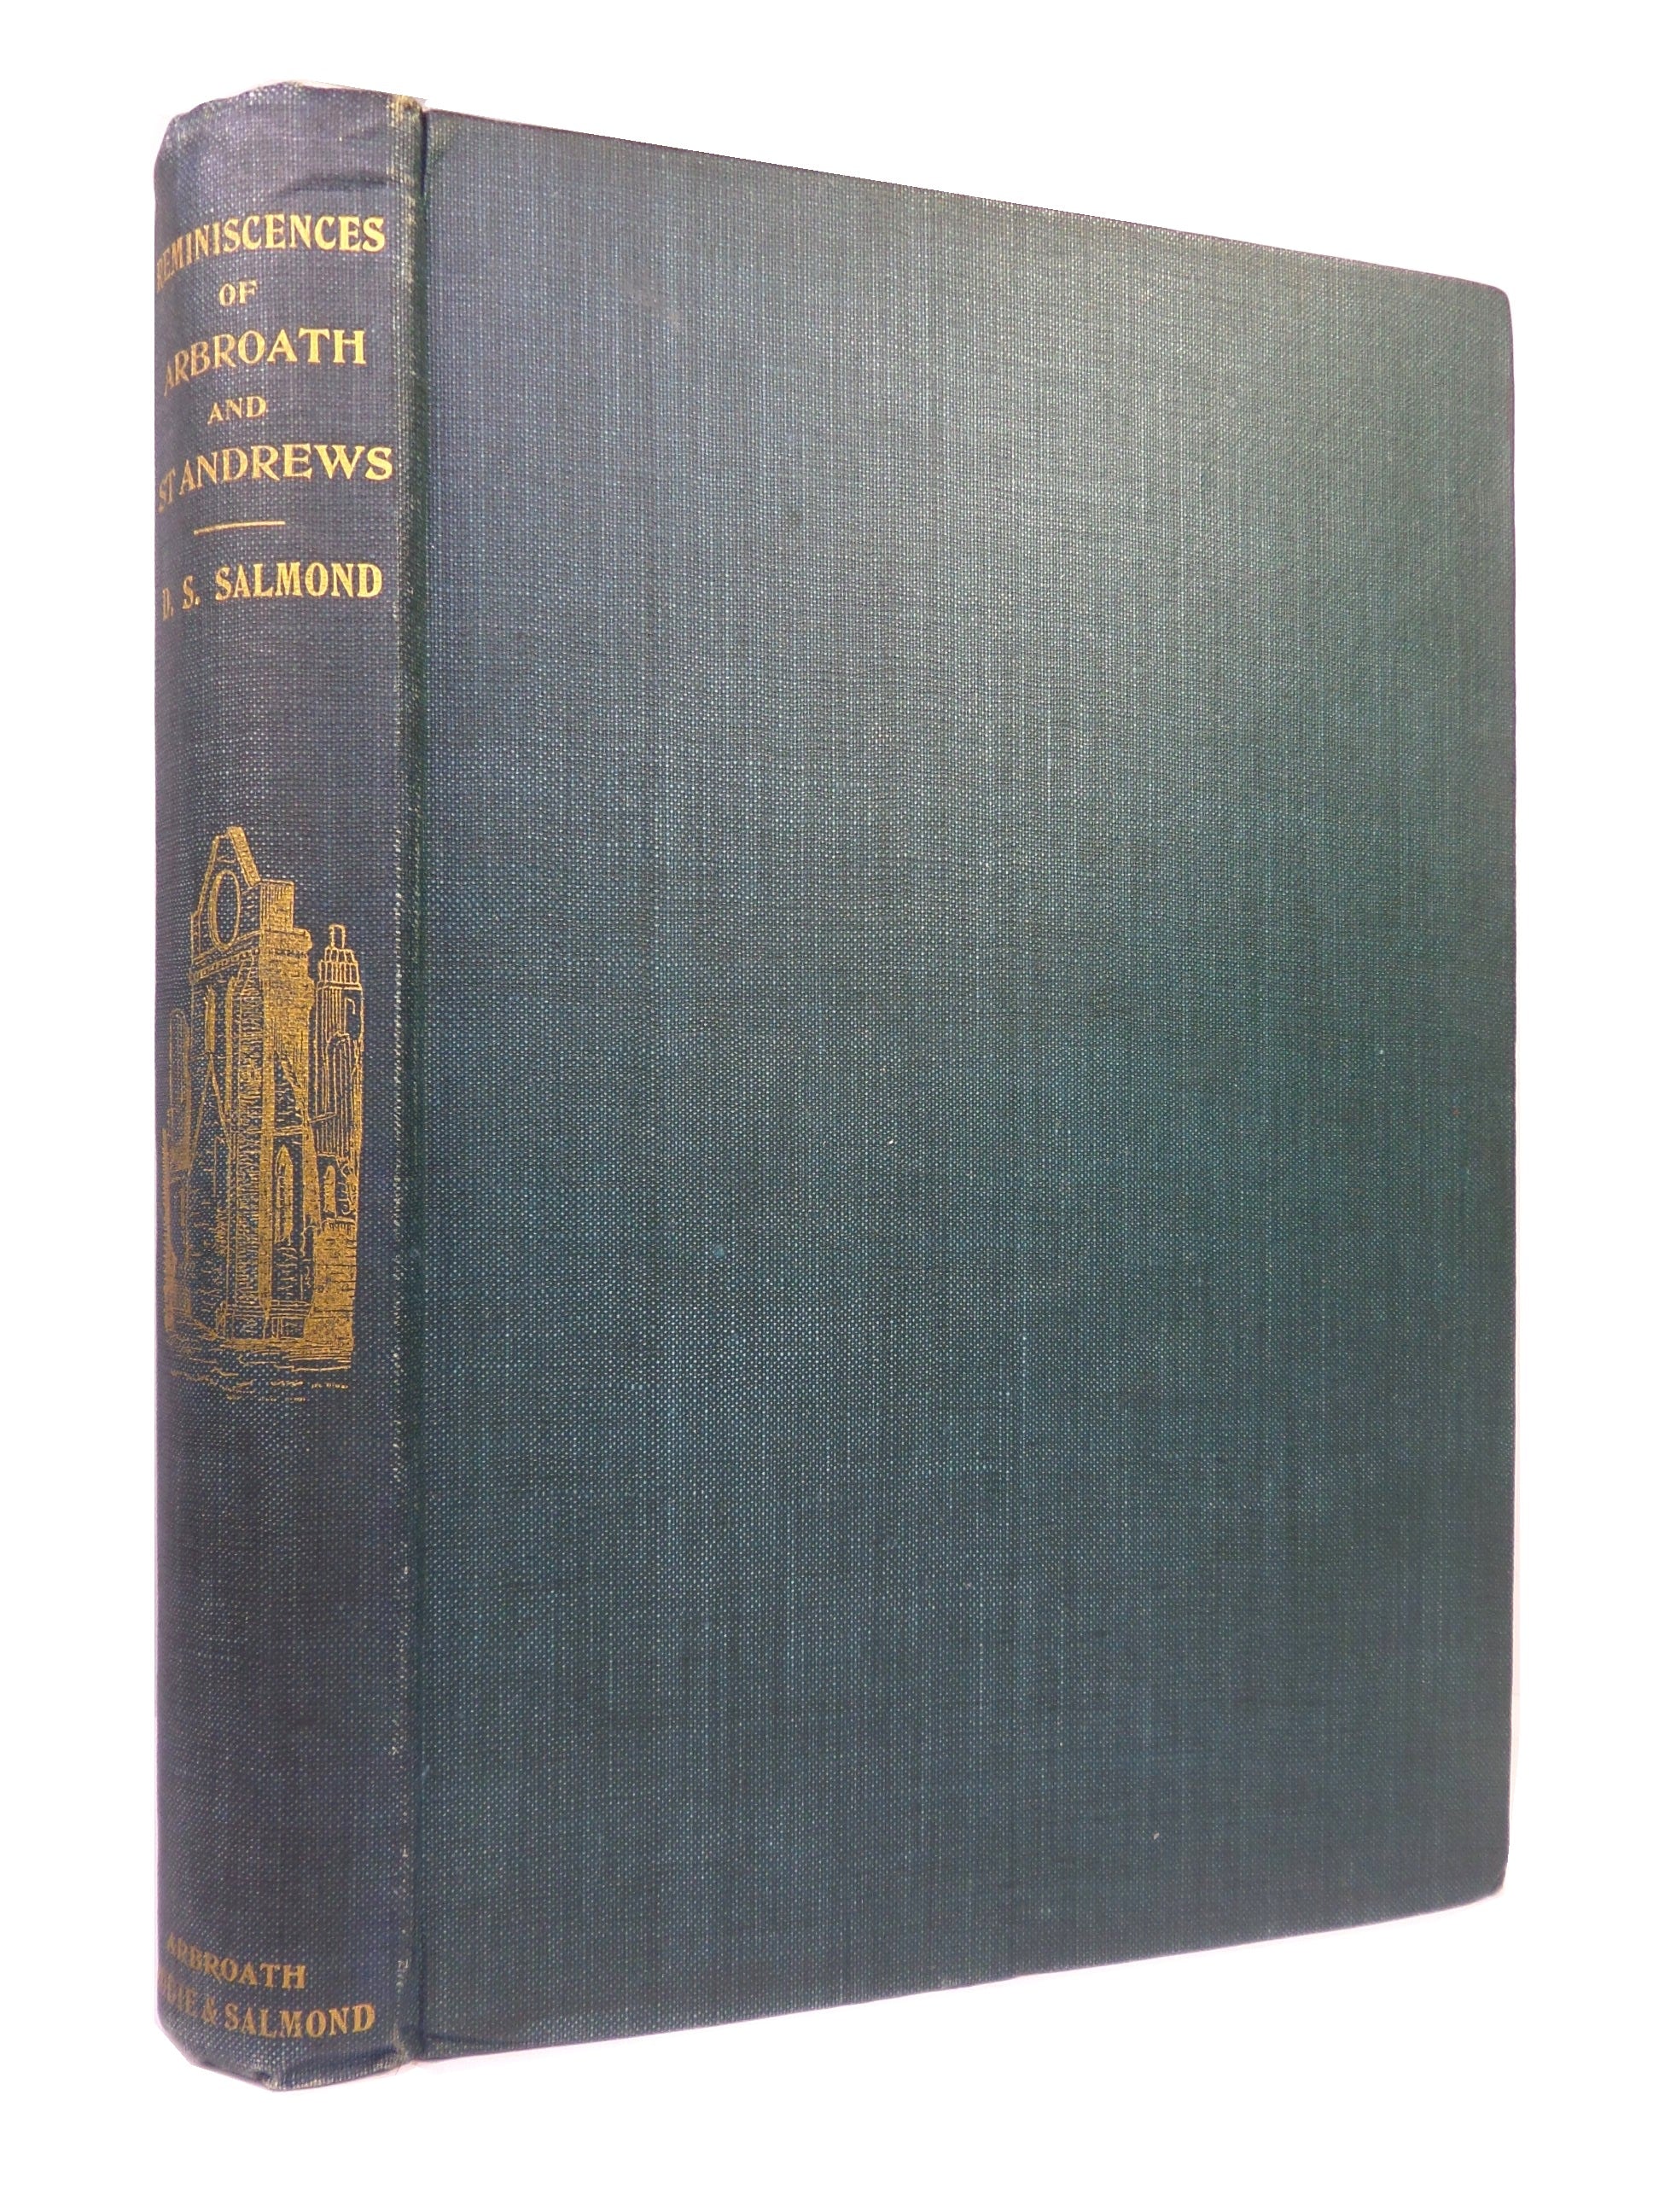 REMINISCENCES OF ARBROATH AND ST ANDREWS 1905 D. S. SALMOND FIRST EDITION